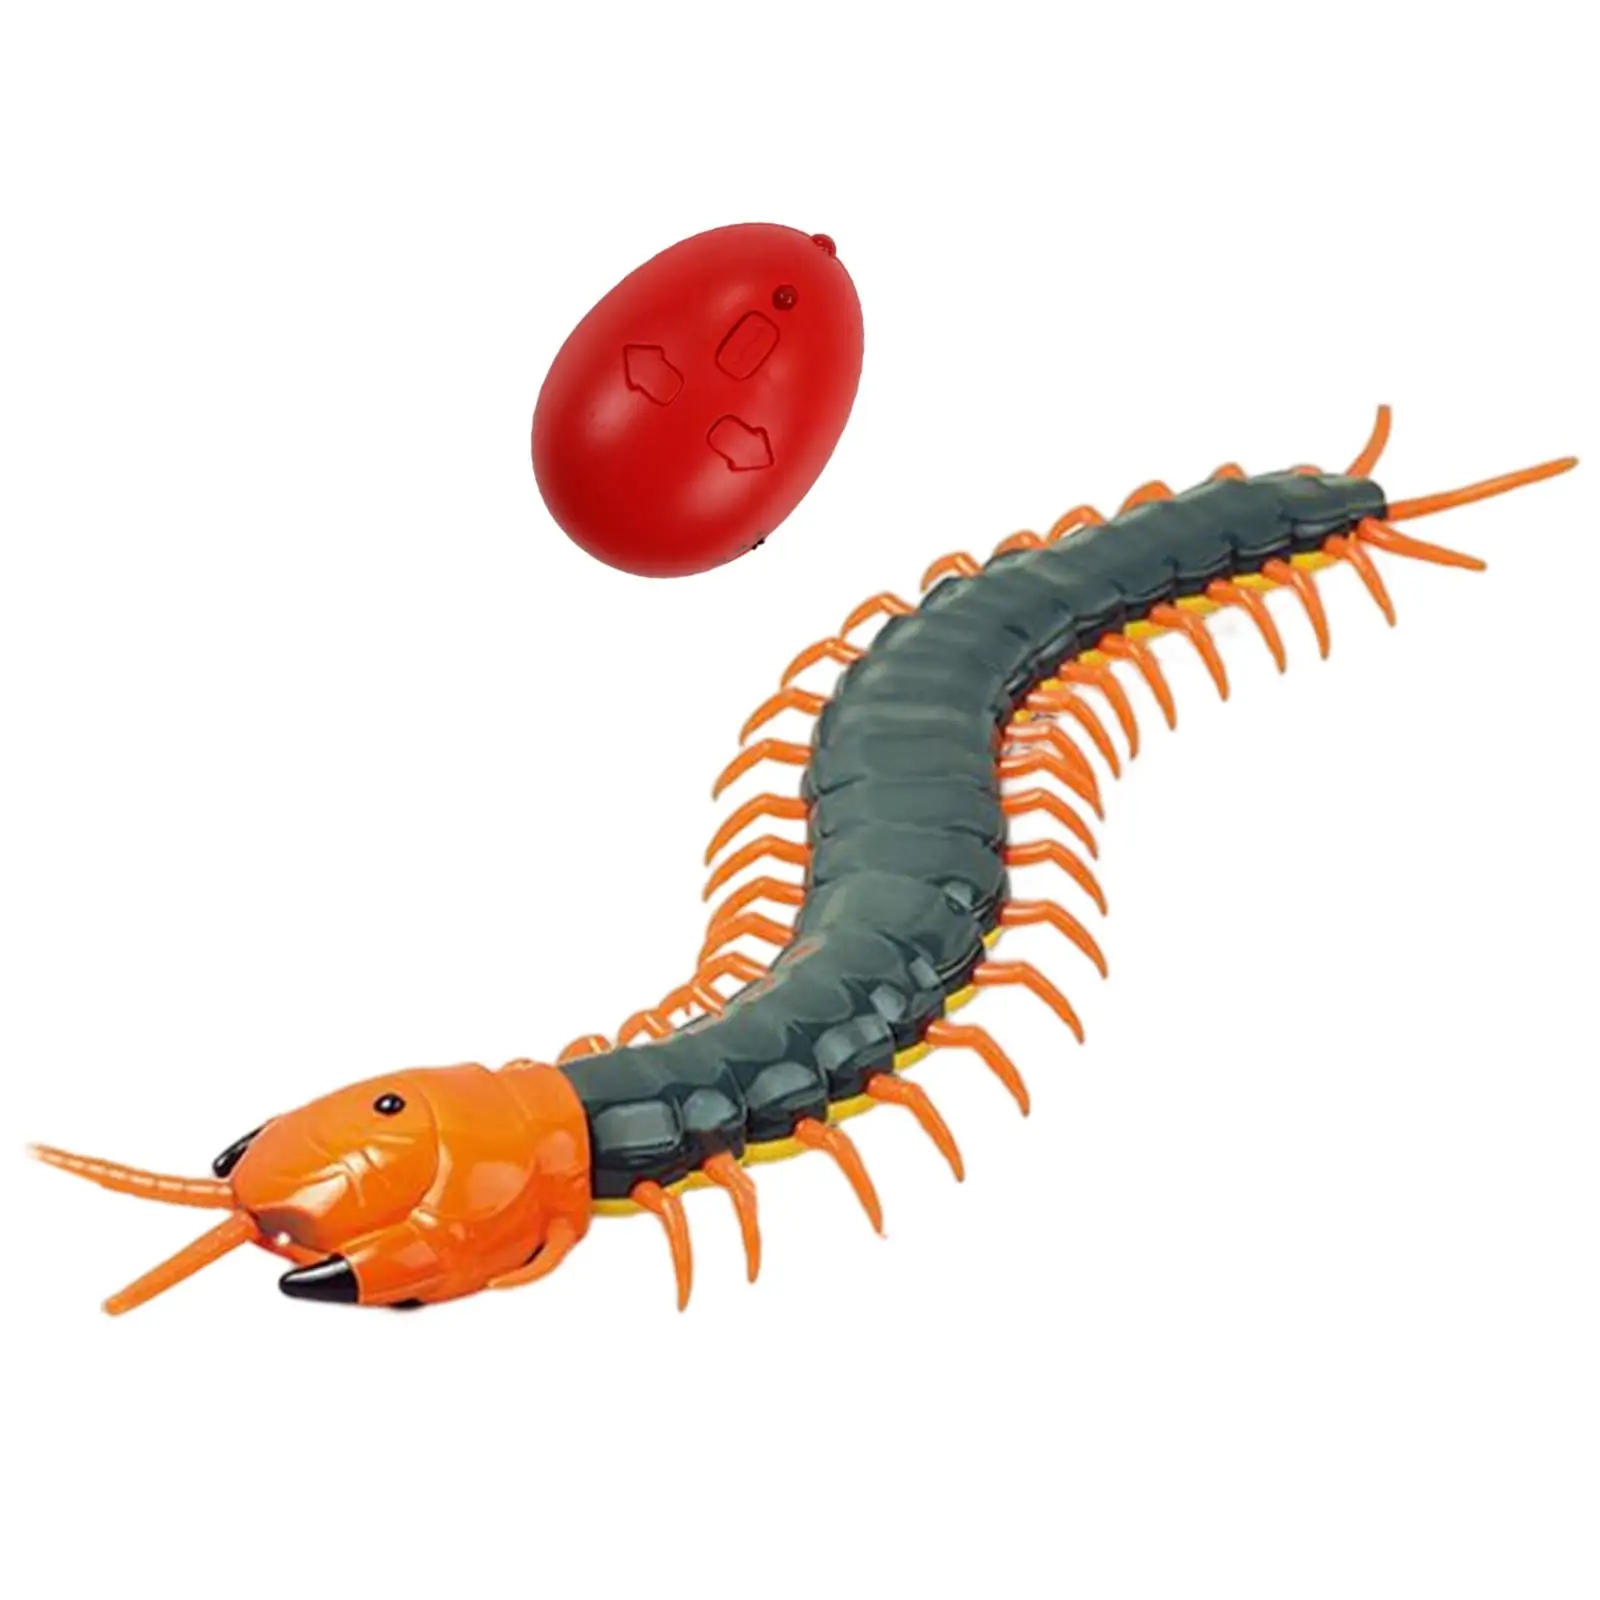 Smart Remote Control Centipede Boys Gifts RC Centipede Insects Toy Remote Control Animal Toy Electric Centipede Toy for Children